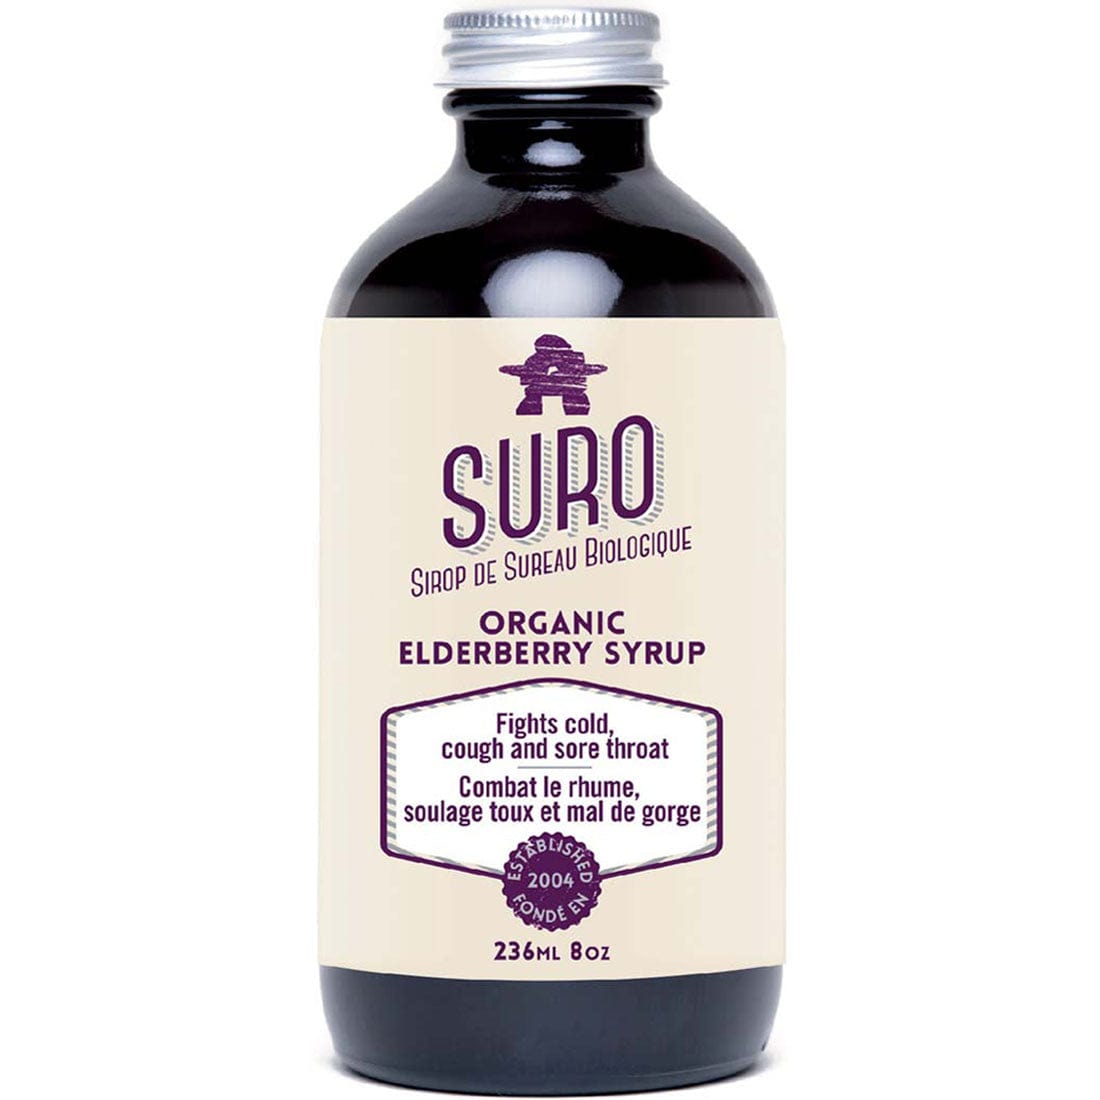 Suro Organic Elderberry Syrup, Fights Colds, Coughs, Sore Throat, All-Natural, Delicious, & Gluten-Free